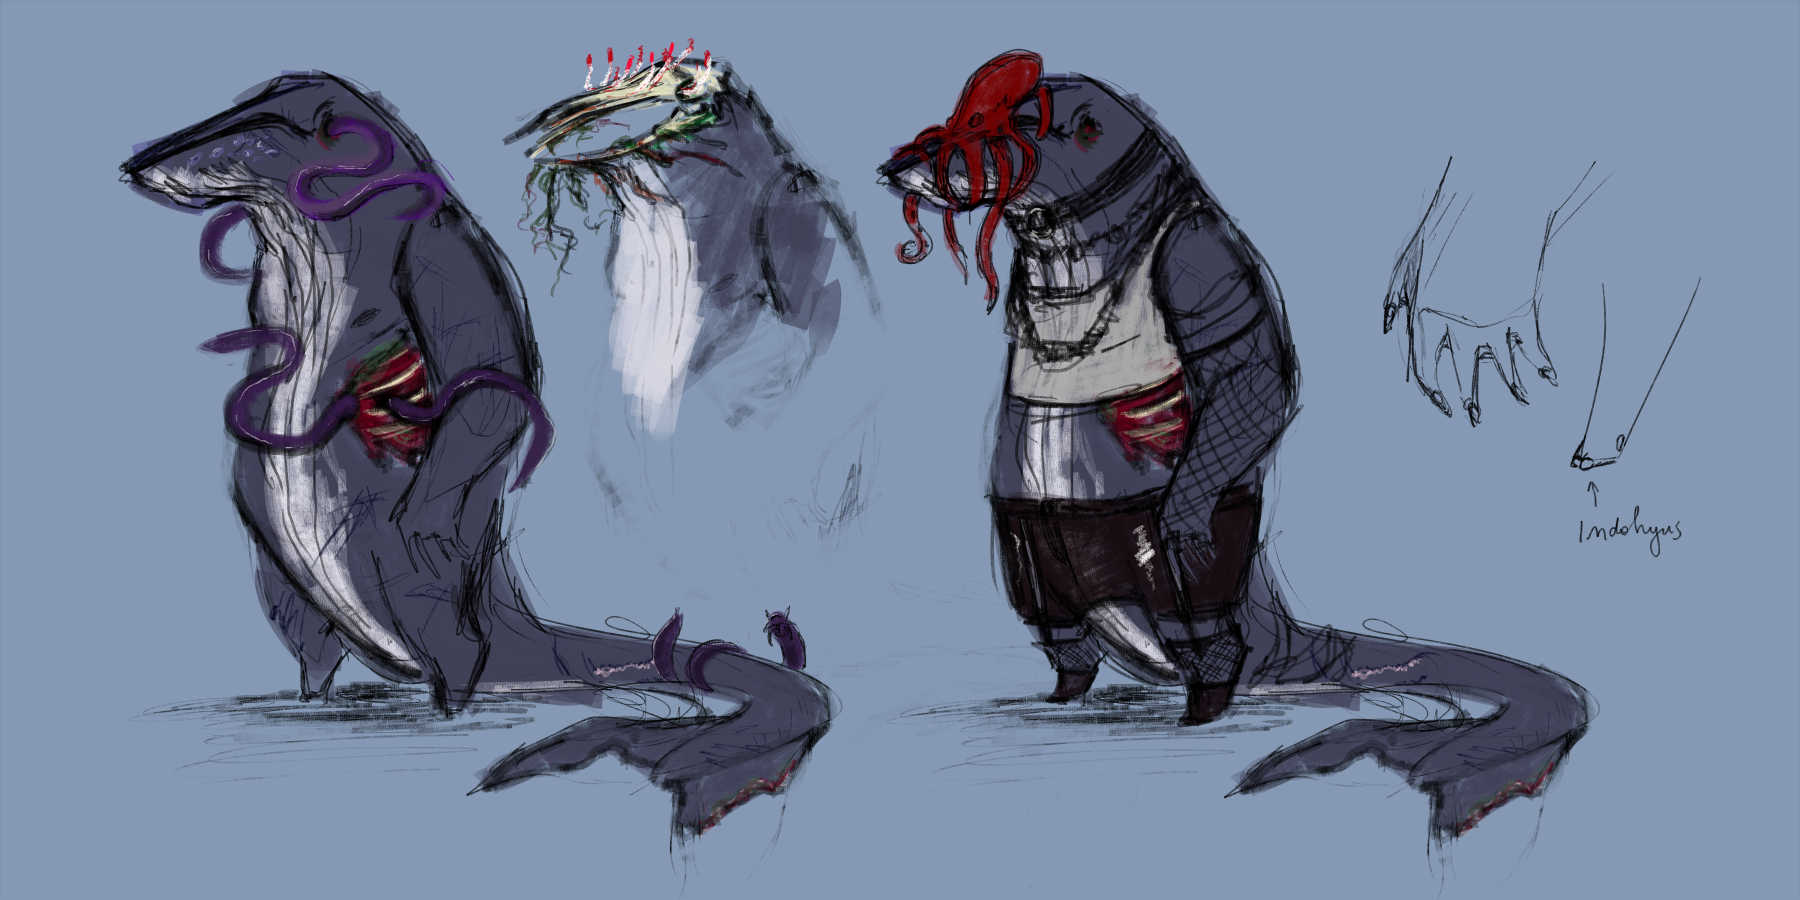 digital sketch, three versions of a partially decayed anthro whale. 1) naked, covered in hagfish; 2) fully visible skull covered in giant tube worms; 3) wearing industrial goth-y clothes, jaws shut by an octopus. a detail view shows their feet are hoofed like an indohyus